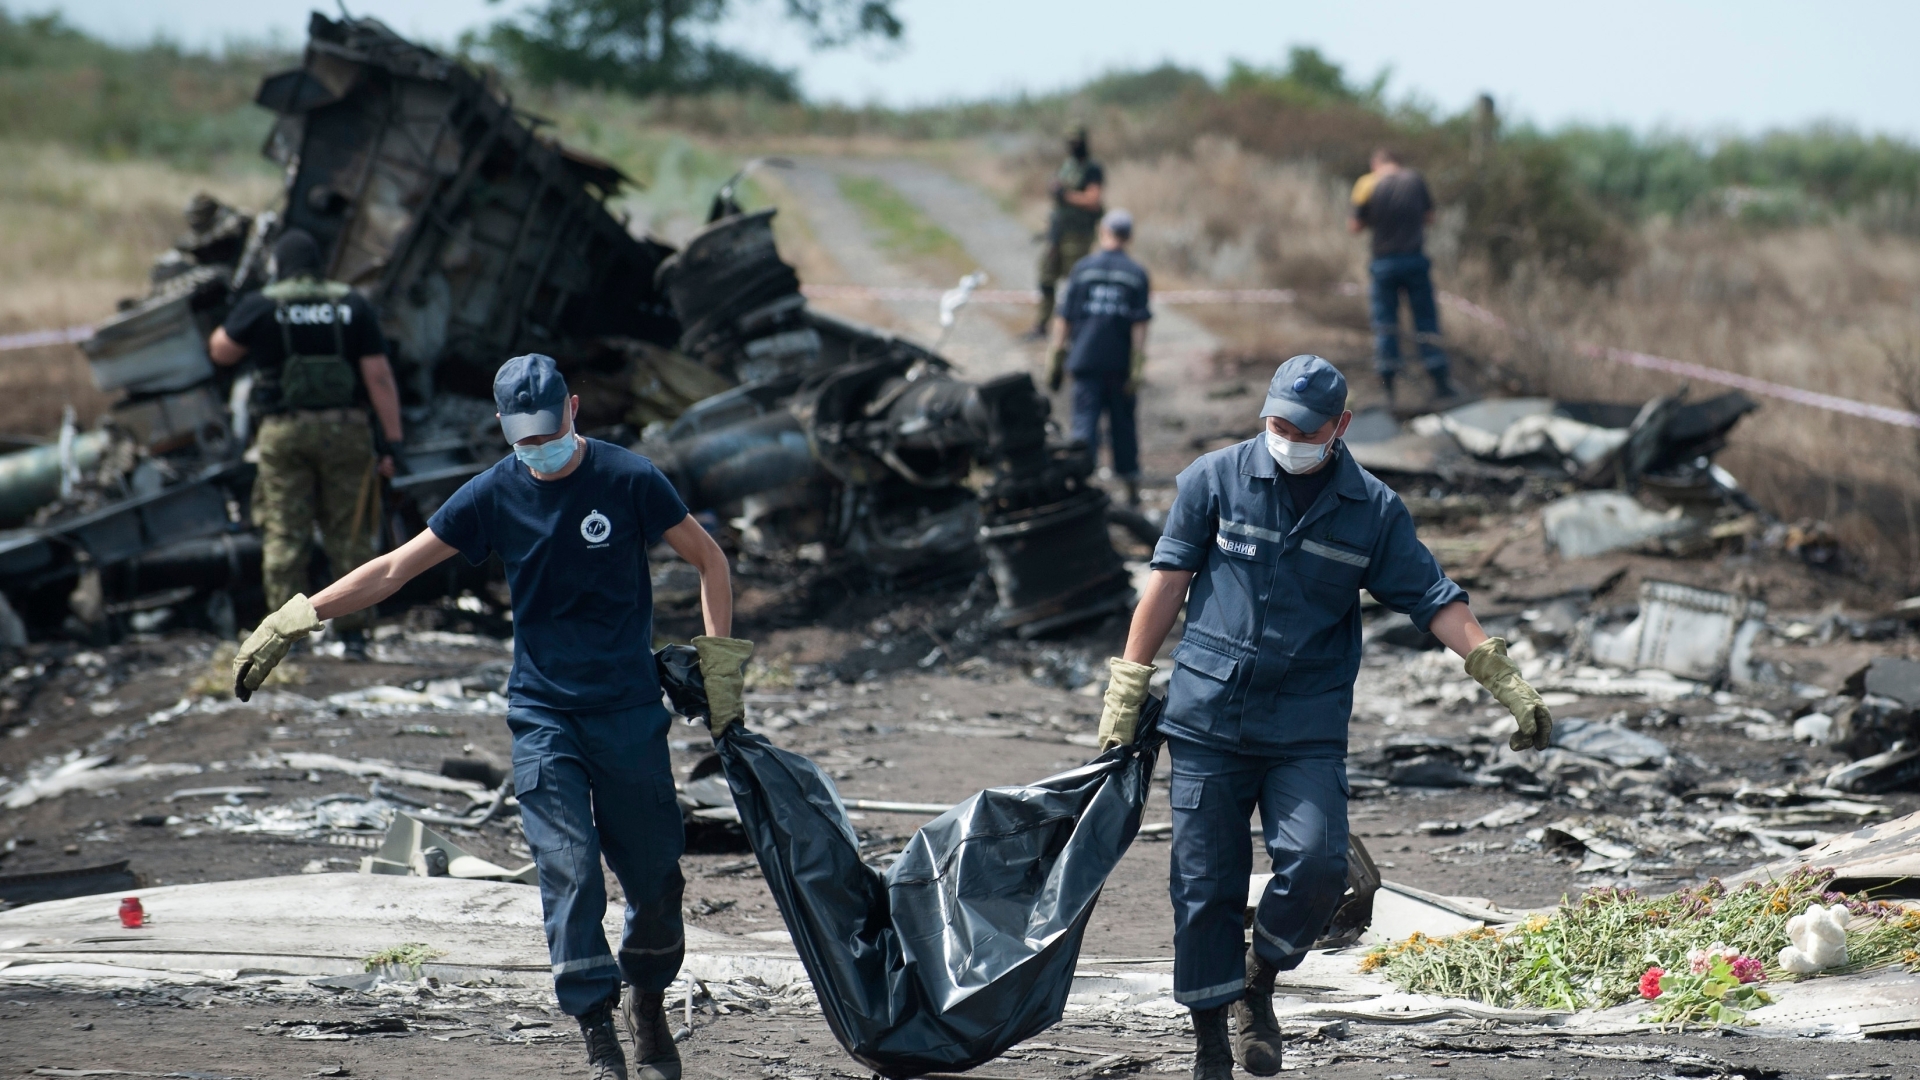 Here's what happened to flight MH17